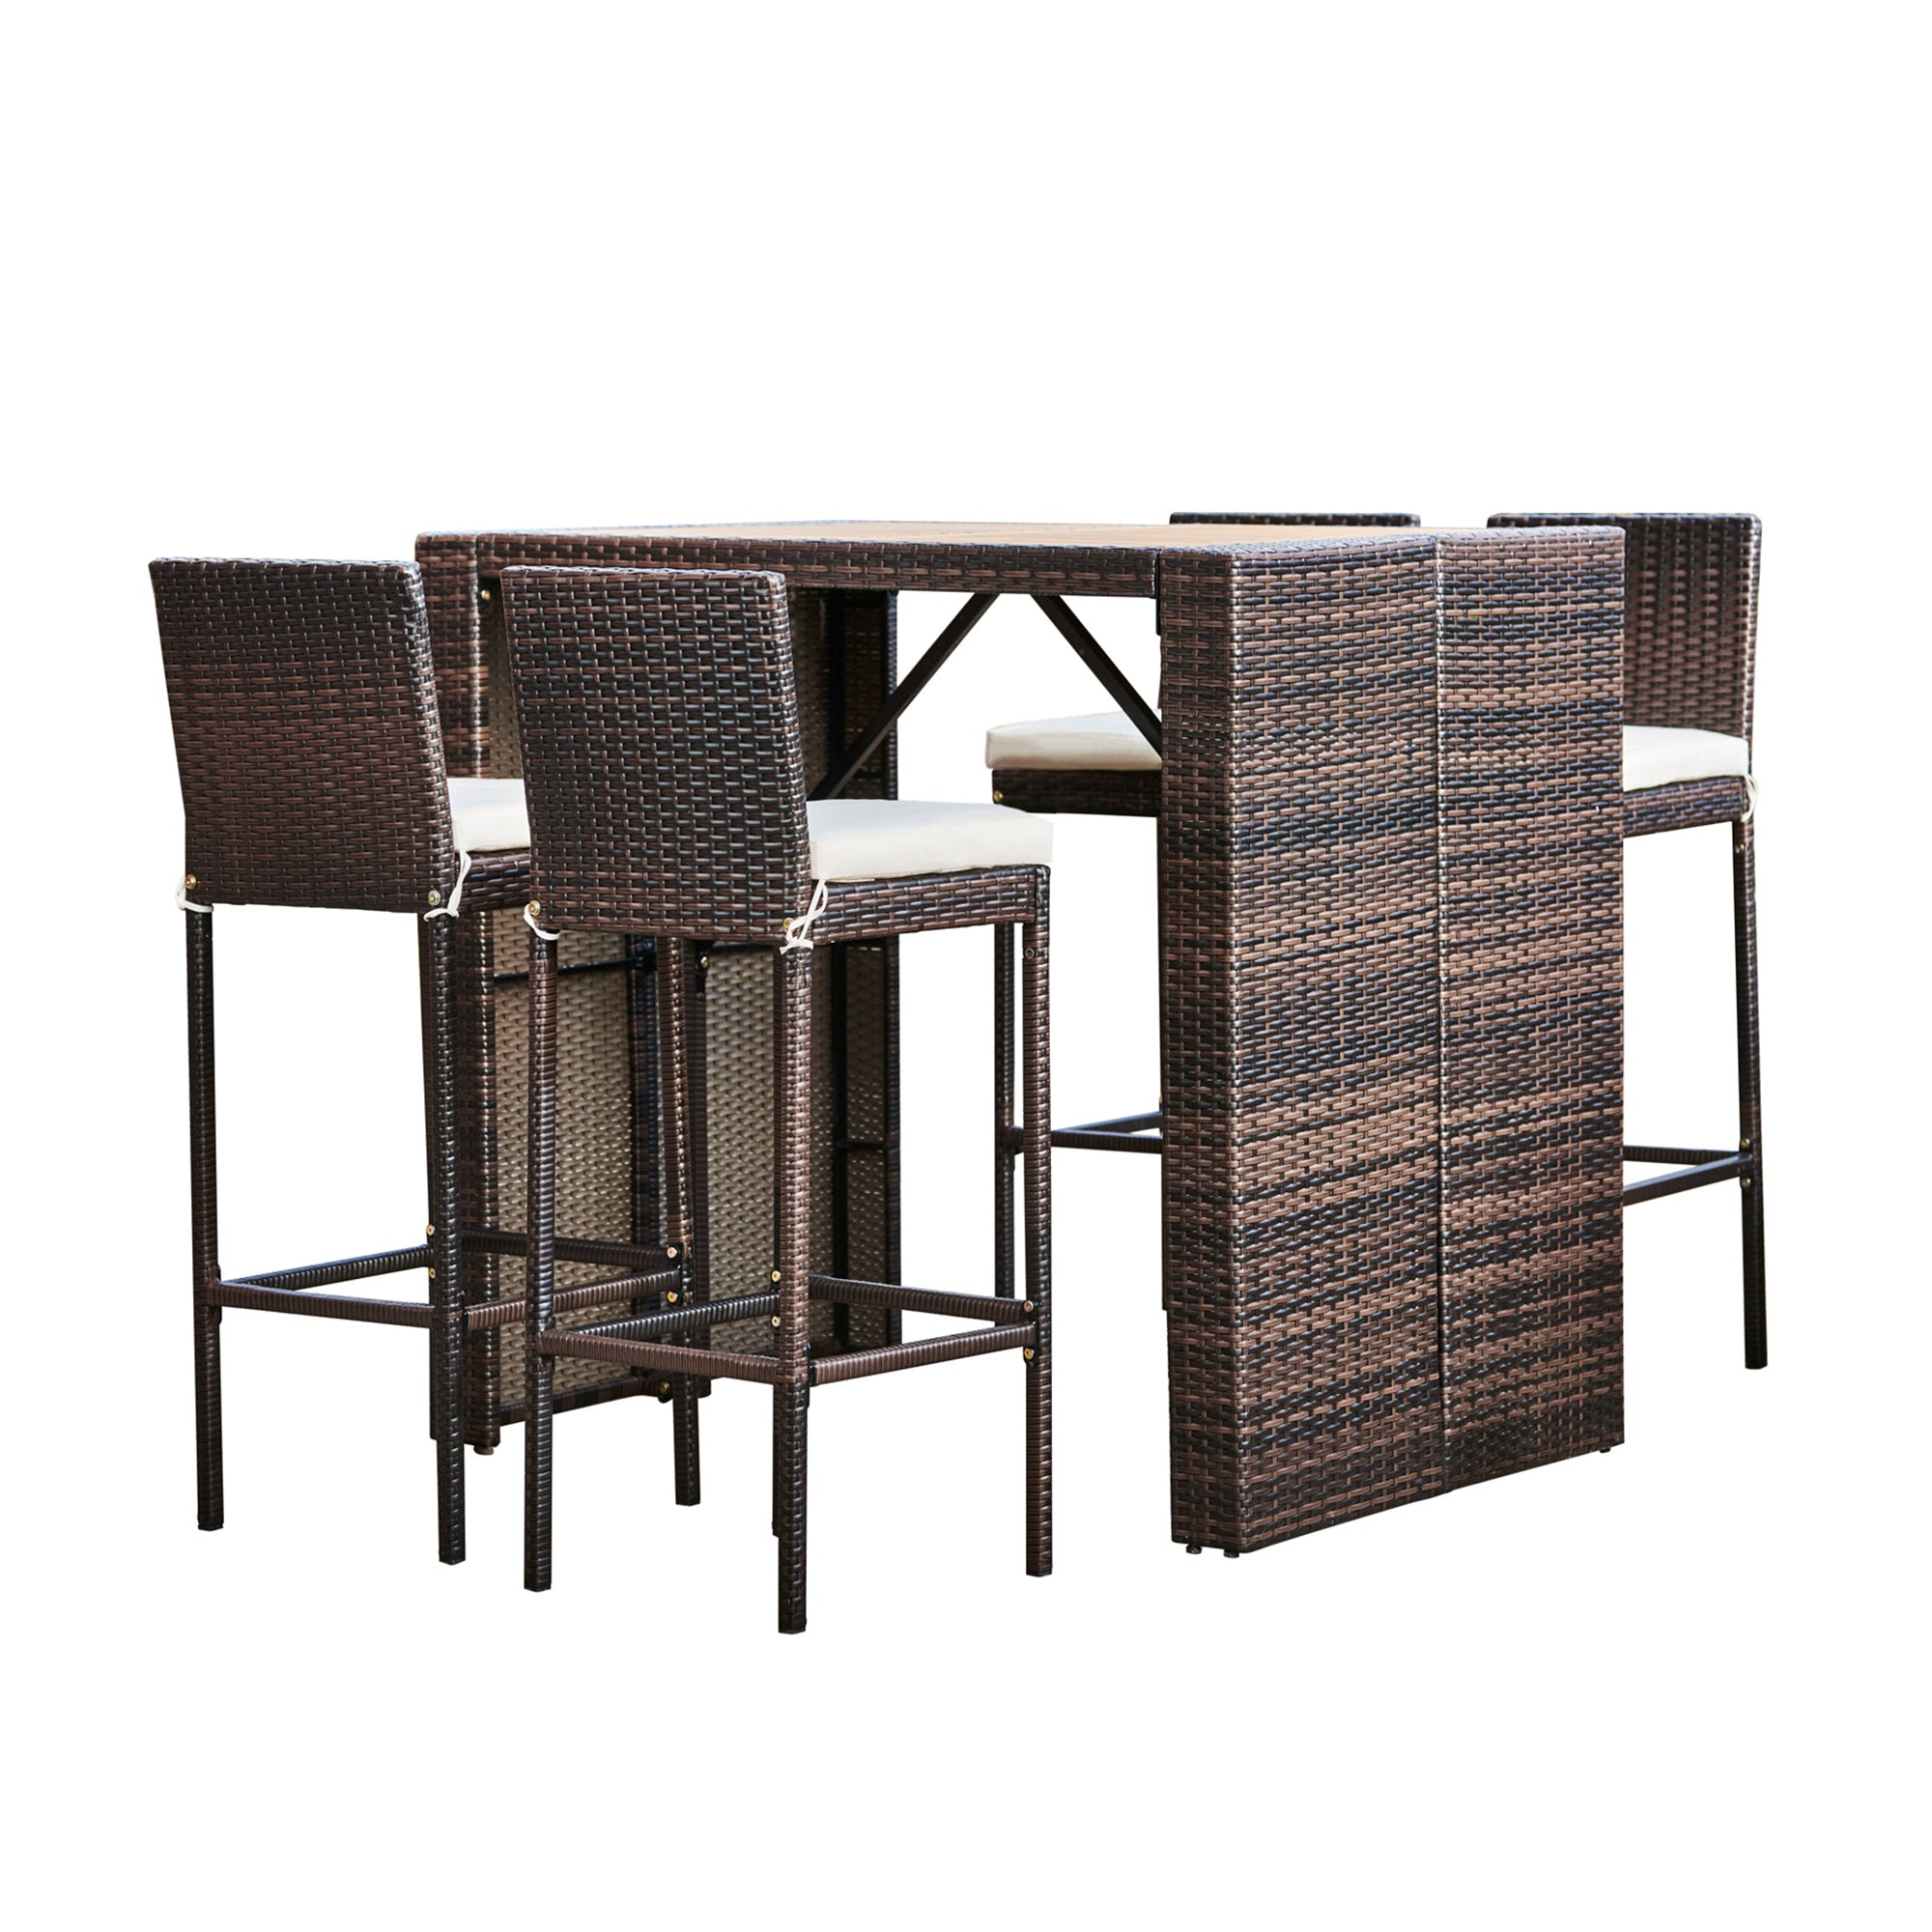 Teamson Home 5 Pc Outdoor Wicker Dining Set with Acacia Tabletop and Cushions, Brown